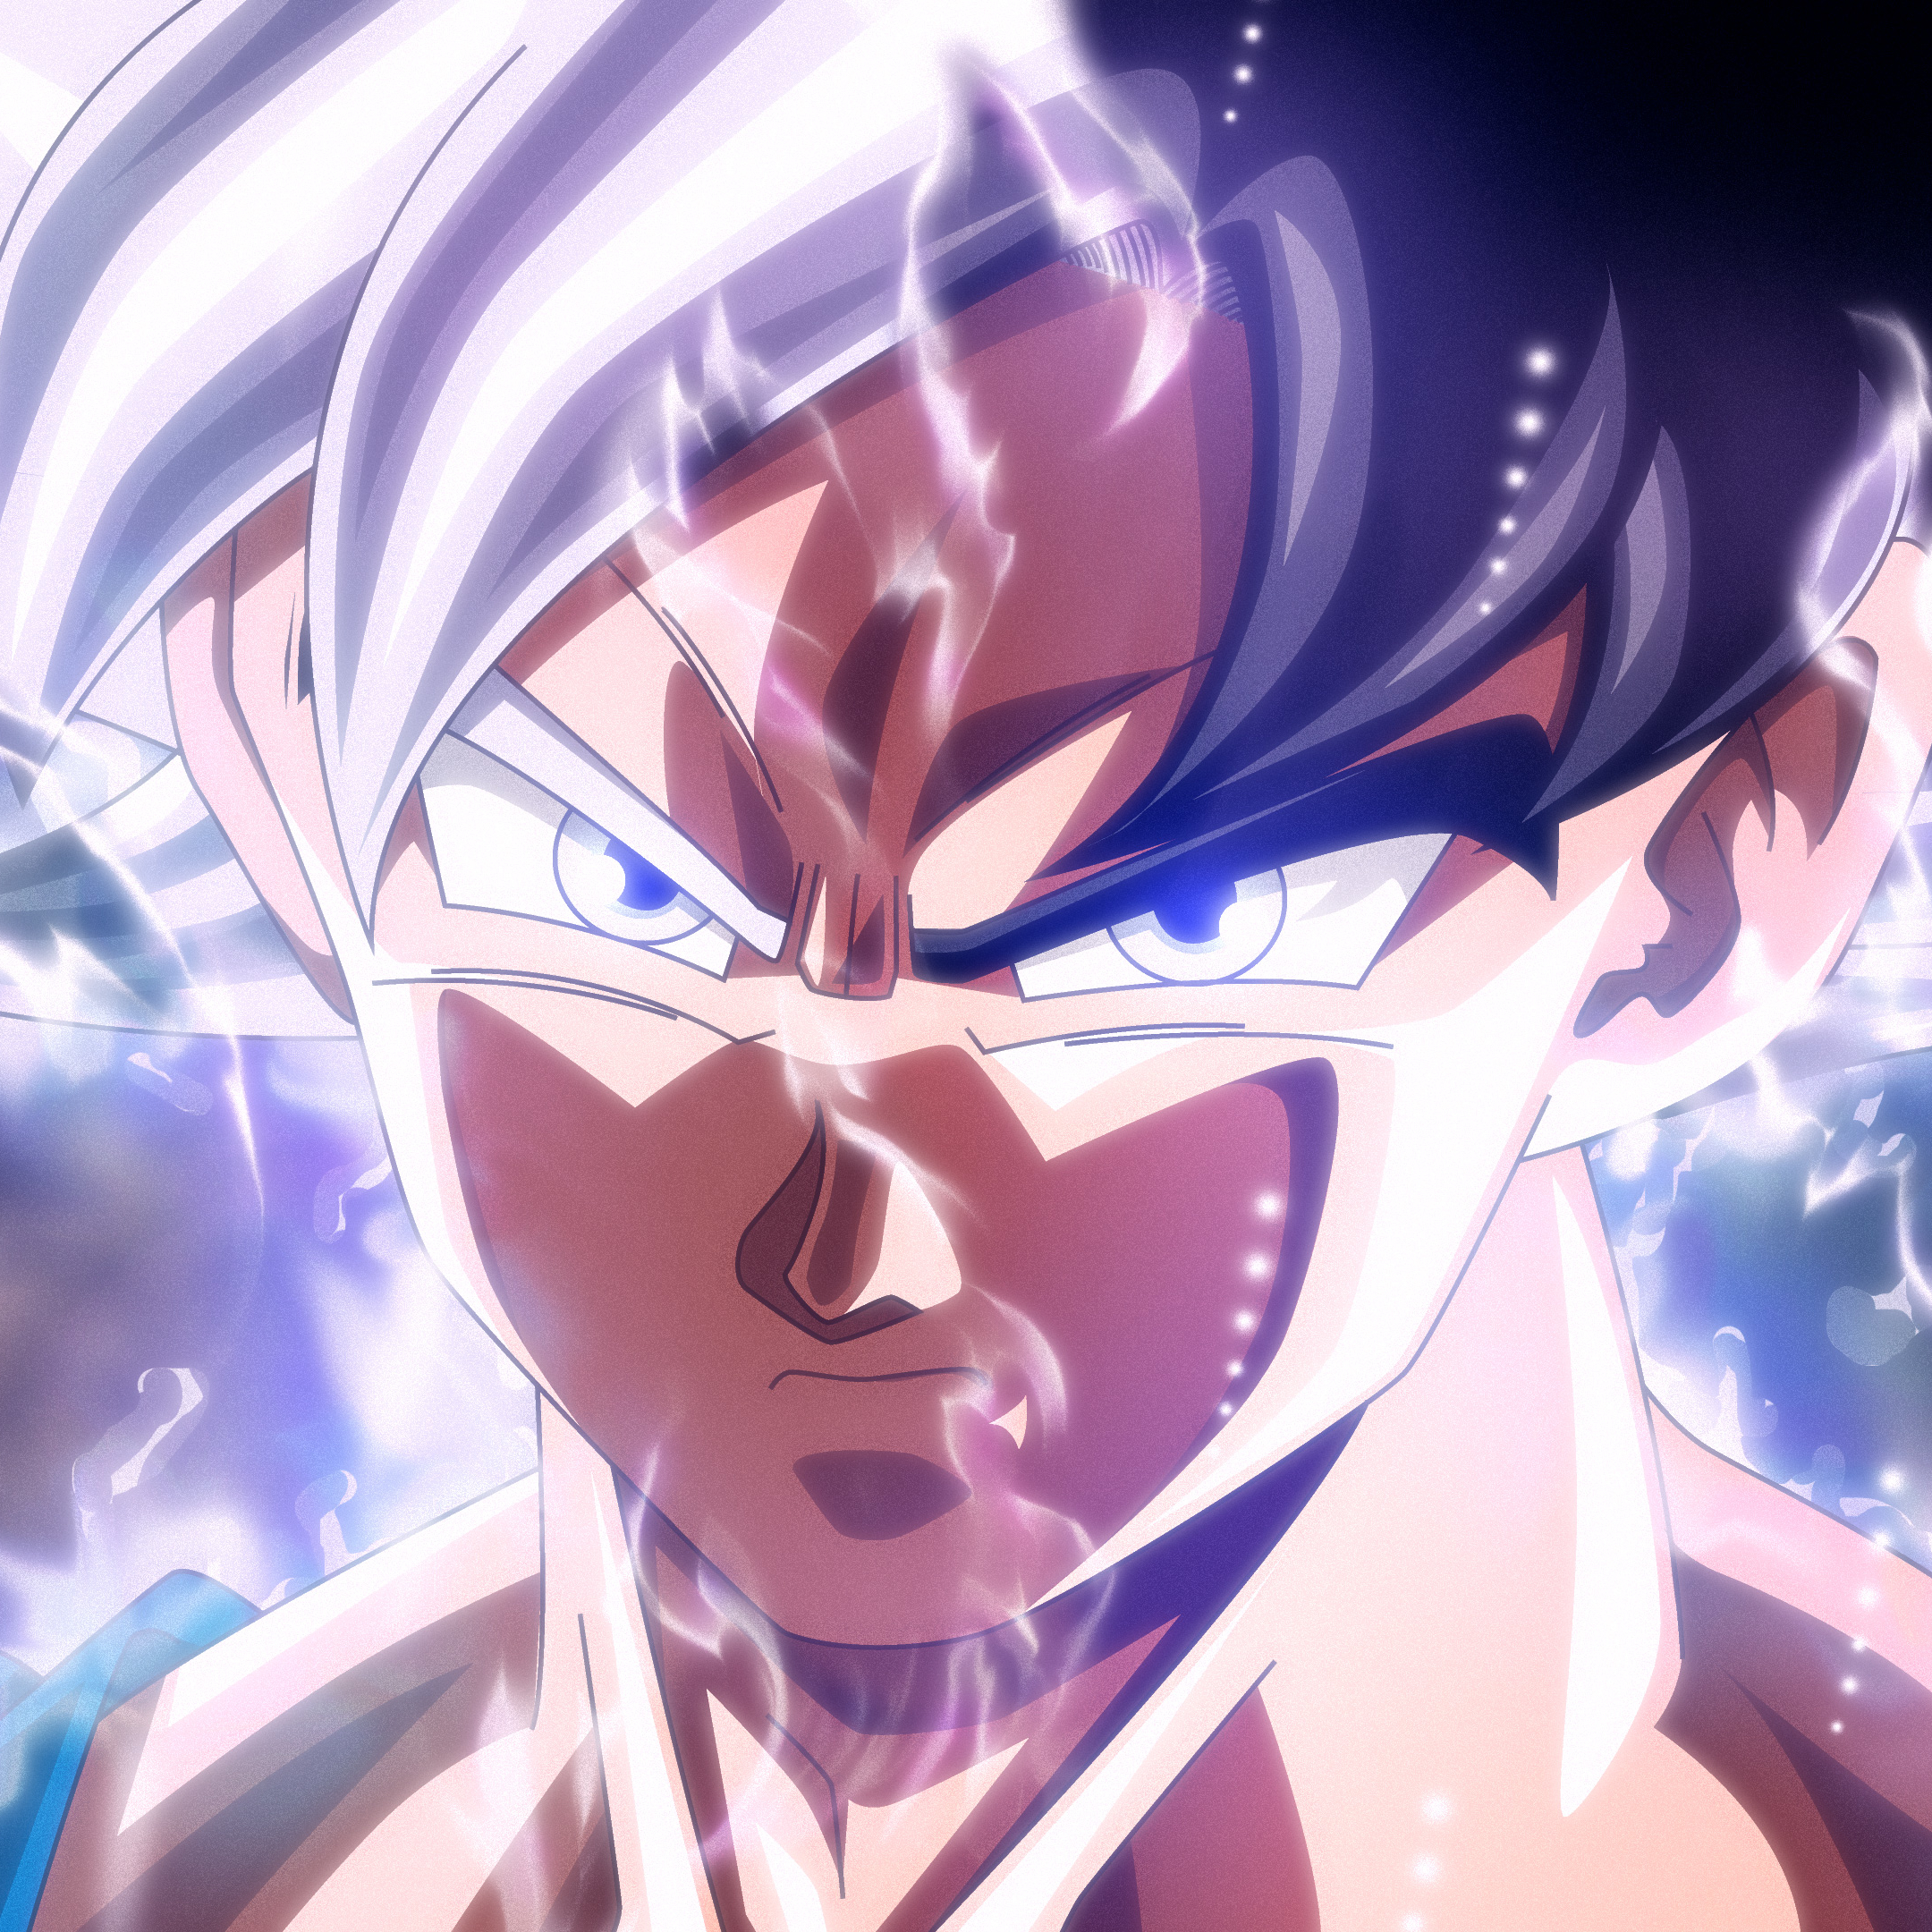 FighterZ  Ultra Instinct Goku  Lobby Avatar  All Color Variations  Release Date 22nd May 2020 Source DbsHype on Twitter   rdragonballfighterz